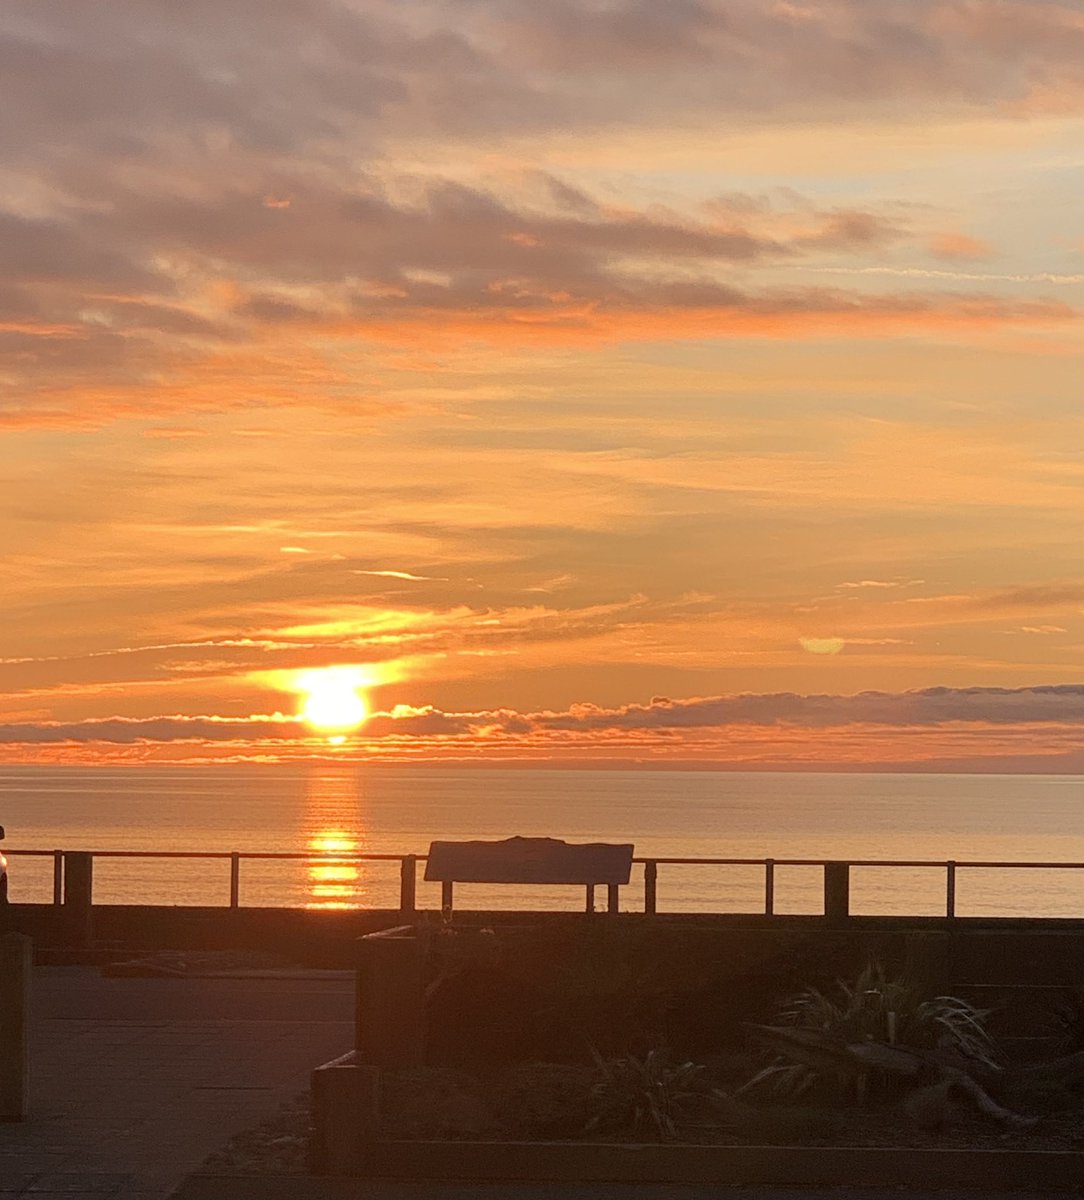 Right now at 17.45 it is still light and the sunset is going to be another beauty. Mother Nature blesses us once again. #Thankful the days are getting longer. #wales #Tywyn #sunsetphotography #sunset #mothernaturesbeauty